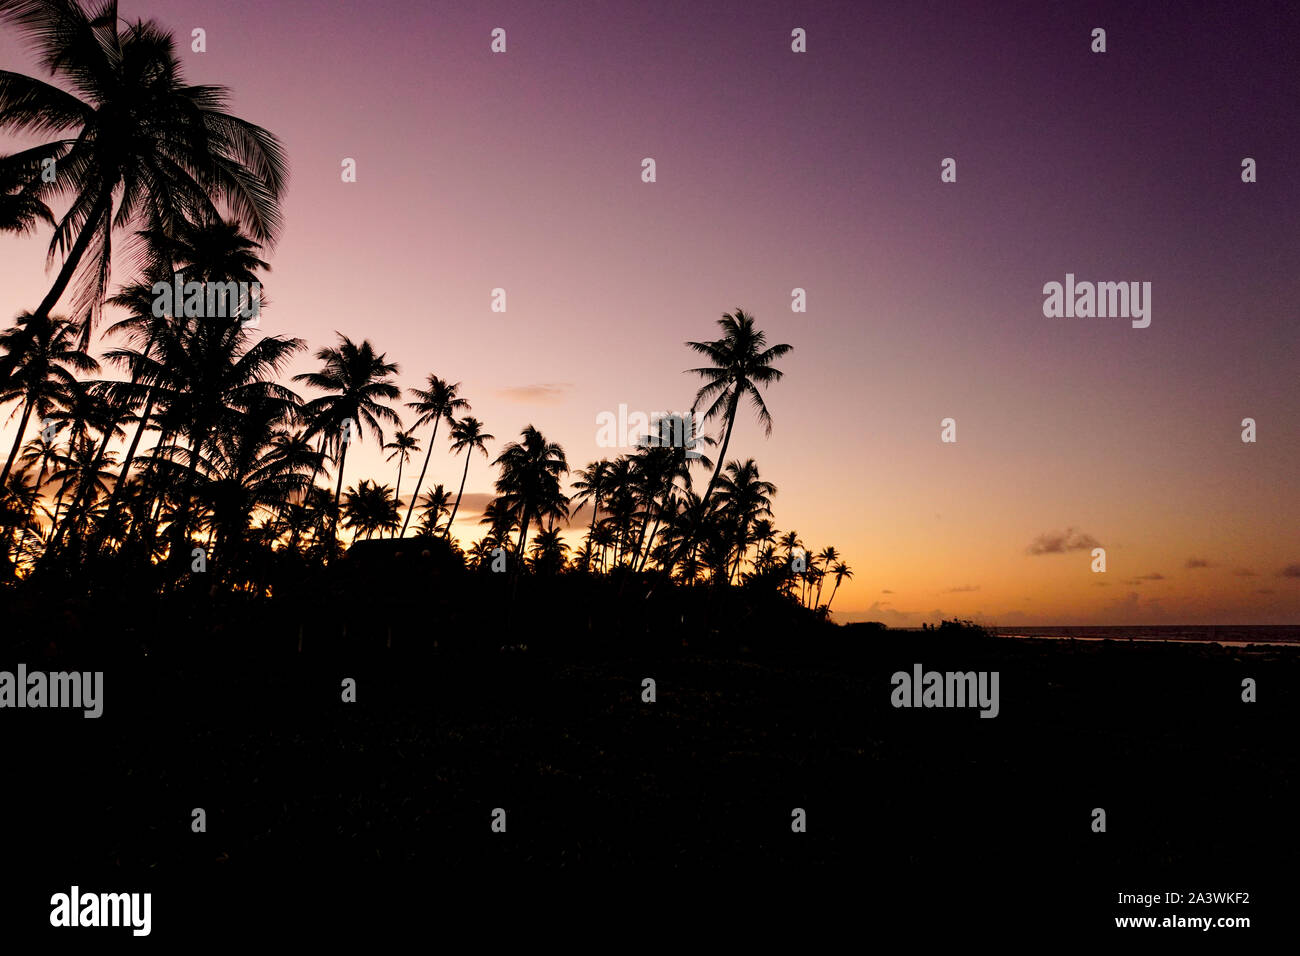 Silhouettes of tropical palm trees, bungalows and the ocean  in front of a colorful sunset on the island of Fakarava in French Polynesia Stock Photo